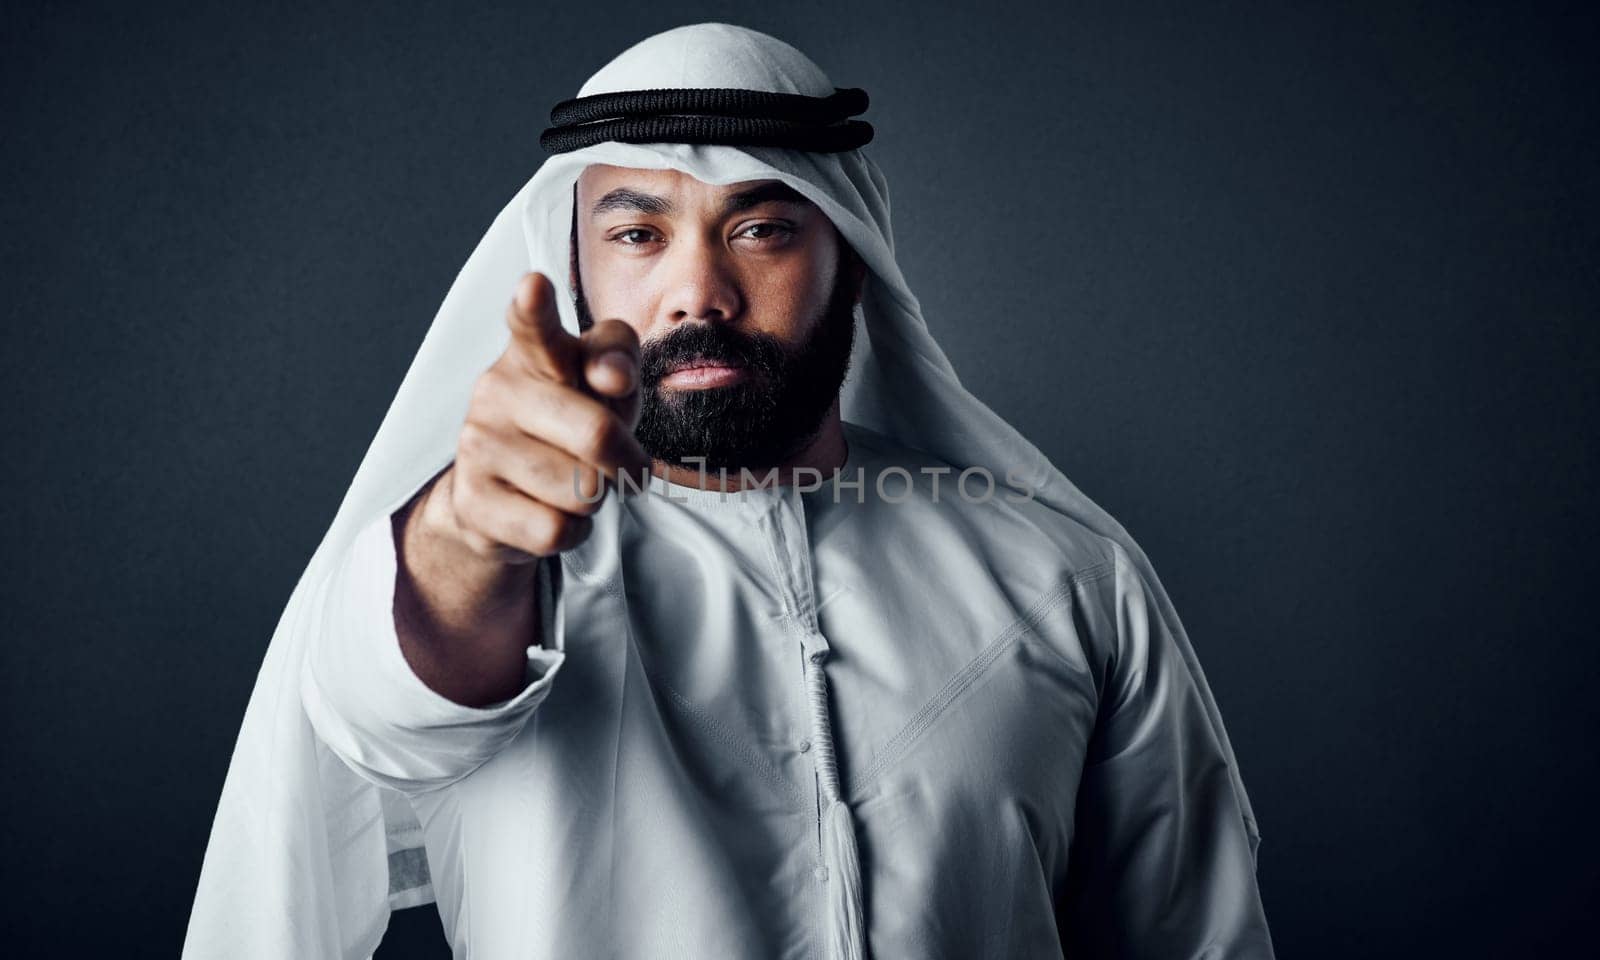 You are in charge of the success of your business. Studio shot of a young man dressed in Islamic traditional clothing posing against a dark background